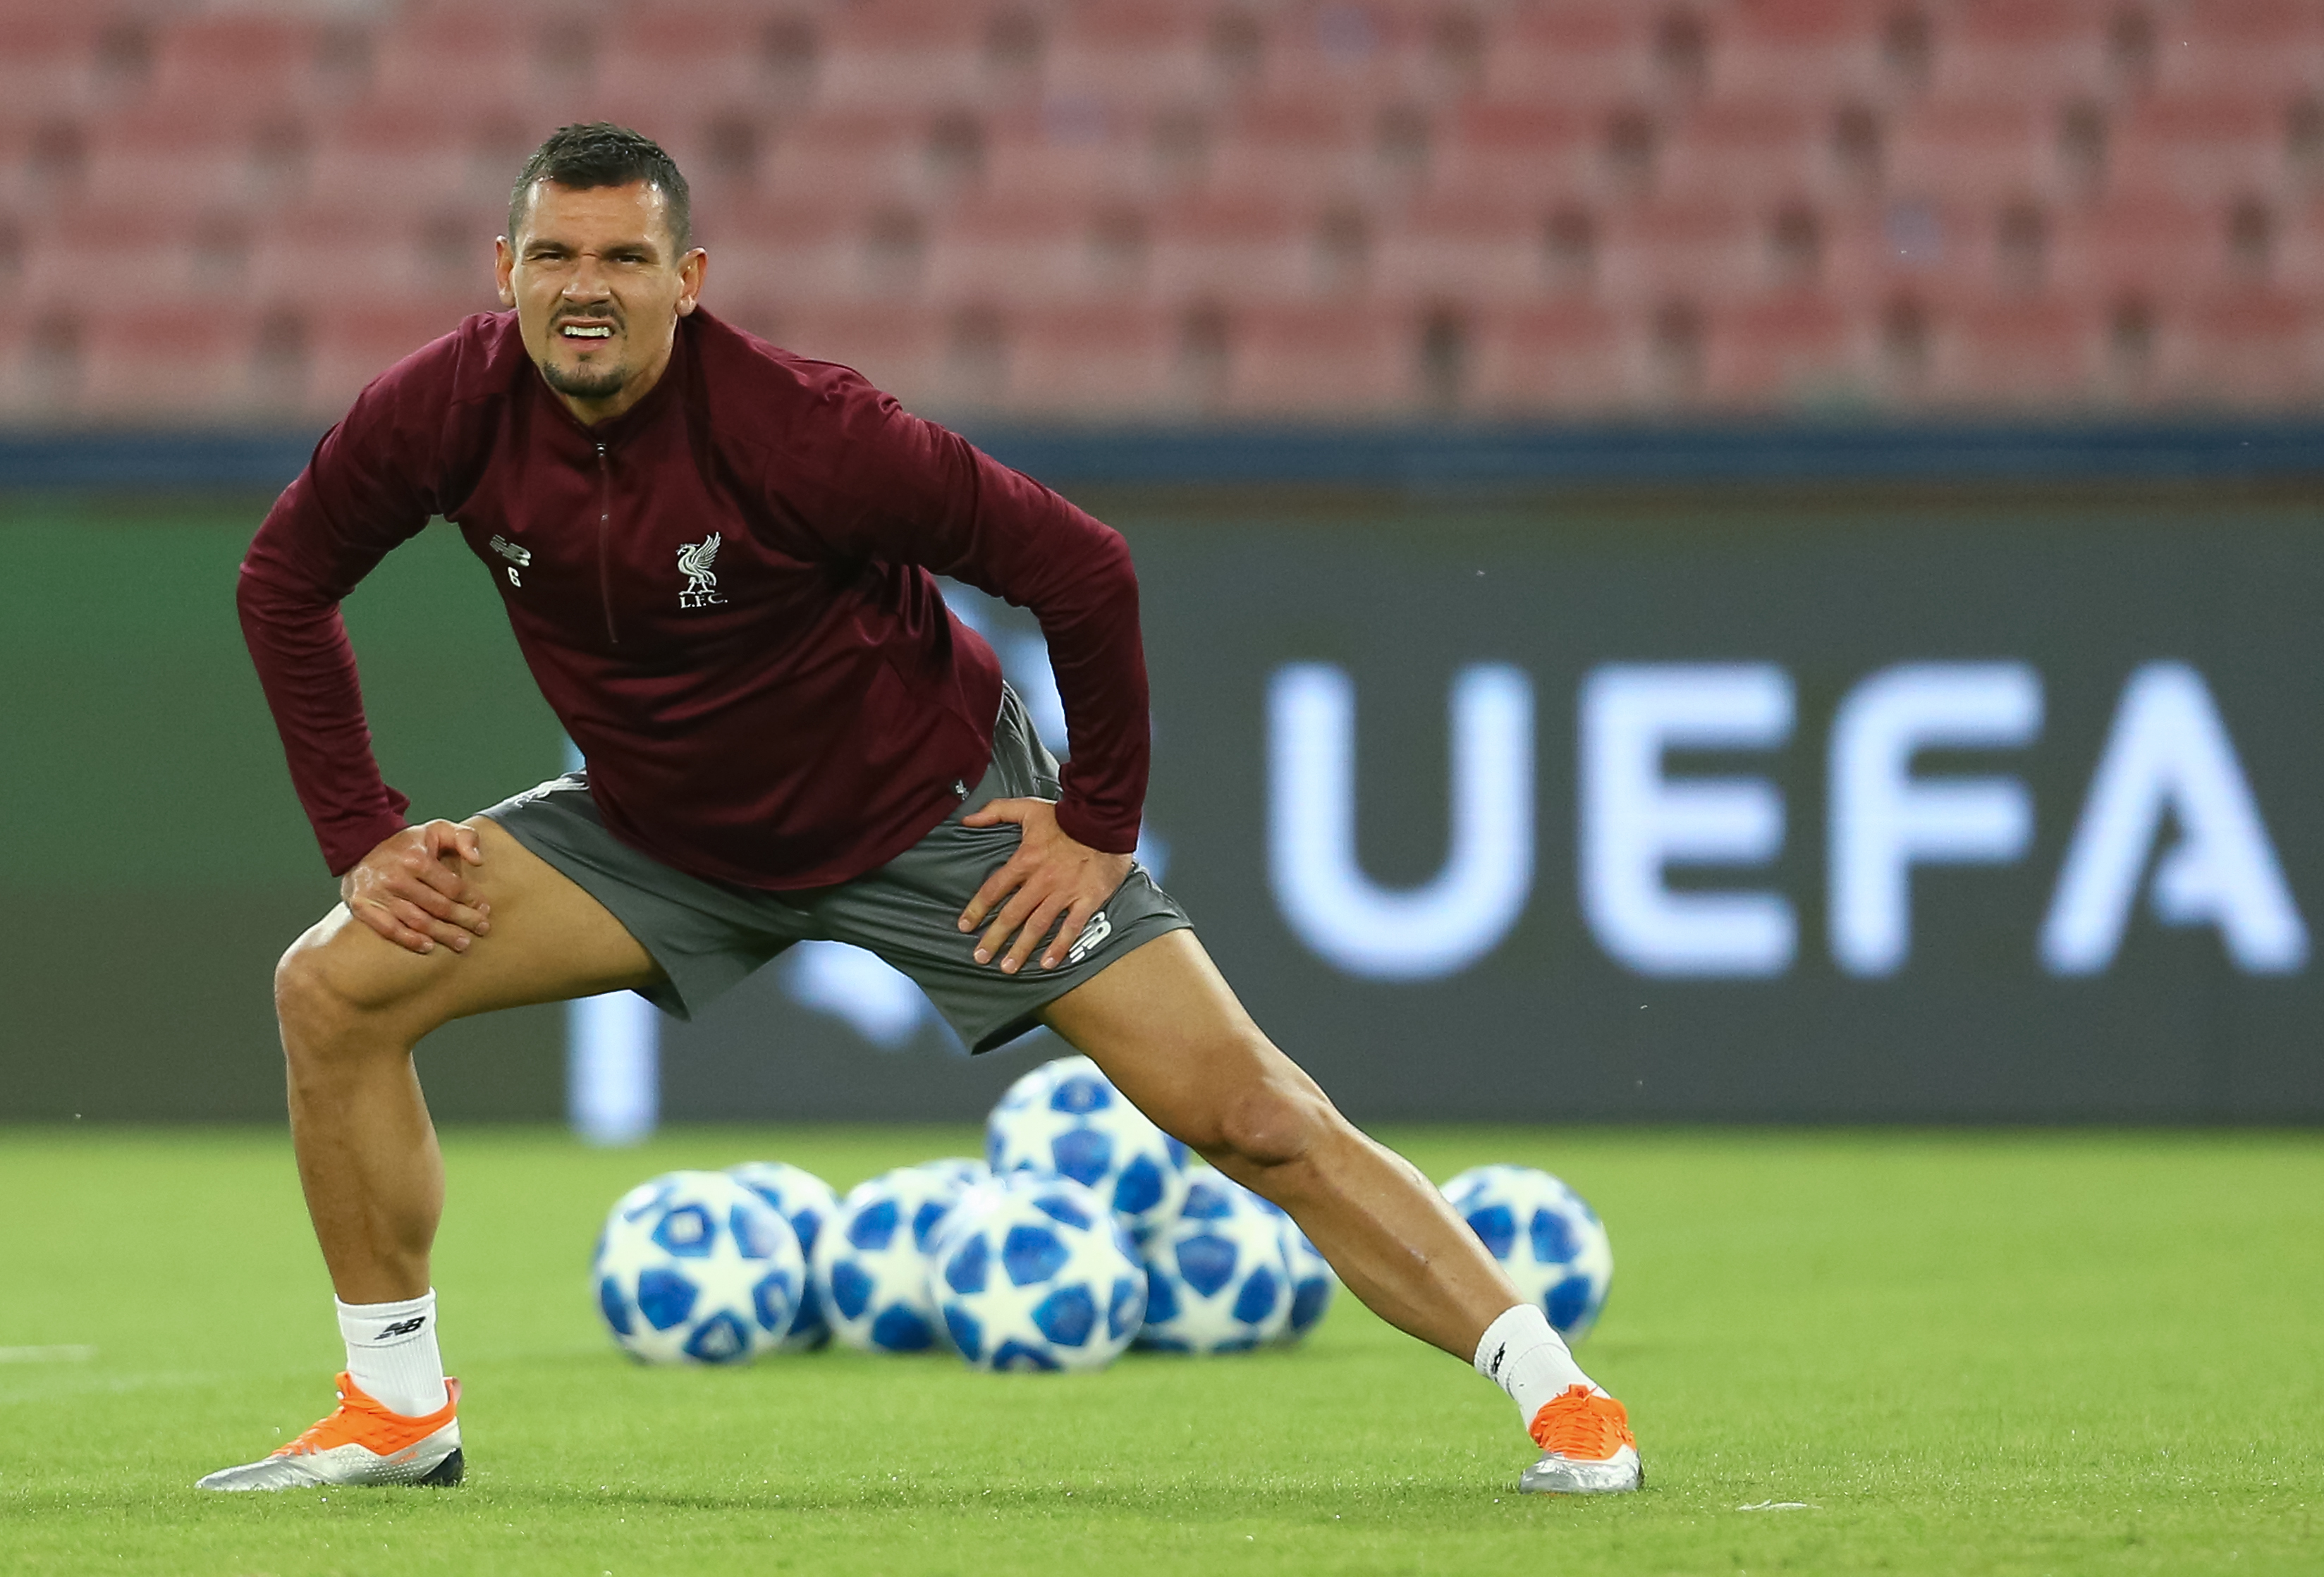 Liverpool's Croatian defender Dejan Lovren stretches during a training session on the eve of the UEFA Champions League Group C football match Napoli vs Liverpool, on October 2, 2018 at the San Paolo stadium in Naples. (Photo by CARLO HERMANN / AFP)        (Photo credit should read CARLO HERMANN/AFP/Getty Images)